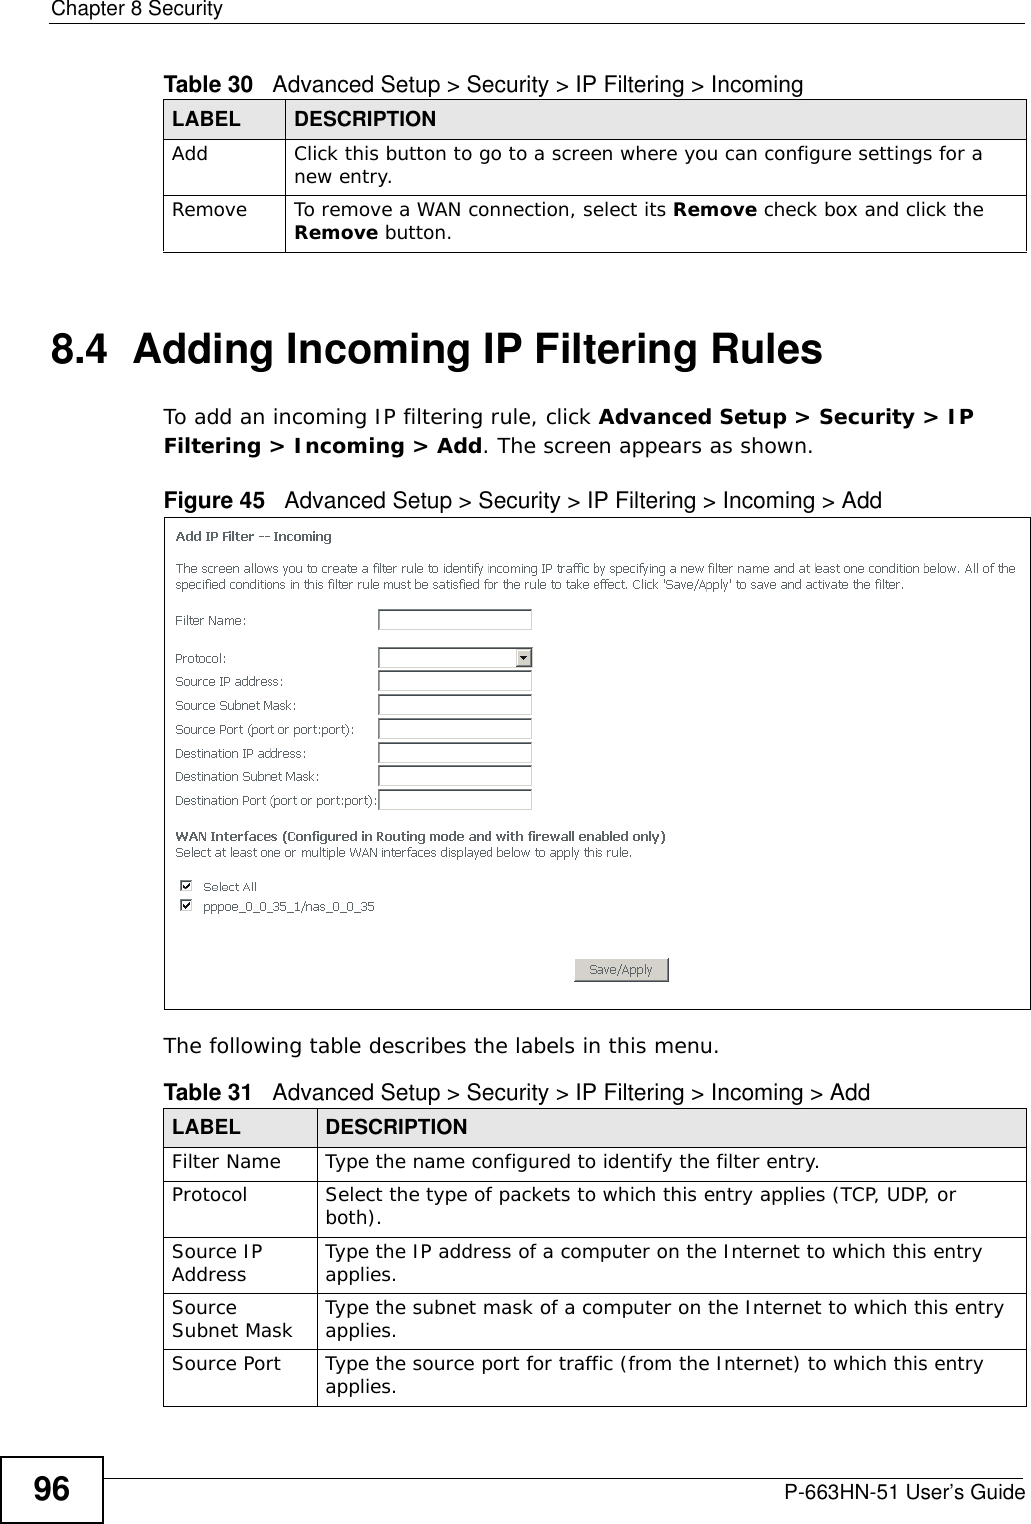 Chapter 8 SecurityP-663HN-51 User’s Guide968.4  Adding Incoming IP Filtering Rules To add an incoming IP filtering rule, click Advanced Setup &gt; Security &gt; IP Filtering &gt; Incoming &gt; Add. The screen appears as shown.Figure 45   Advanced Setup &gt; Security &gt; IP Filtering &gt; Incoming &gt; AddThe following table describes the labels in this menu.Add Click this button to go to a screen where you can configure settings for a new entry.Remove To remove a WAN connection, select its Remove check box and click the Remove button. Table 30   Advanced Setup &gt; Security &gt; IP Filtering &gt; IncomingLABEL DESCRIPTIONTable 31   Advanced Setup &gt; Security &gt; IP Filtering &gt; Incoming &gt; AddLABEL DESCRIPTIONFilter Name Type the name configured to identify the filter entry.Protocol Select the type of packets to which this entry applies (TCP, UDP, or both).Source IP Address  Type the IP address of a computer on the Internet to which this entry applies.Source Subnet Mask Type the subnet mask of a computer on the Internet to which this entry applies.Source Port Type the source port for traffic (from the Internet) to which this entry applies.